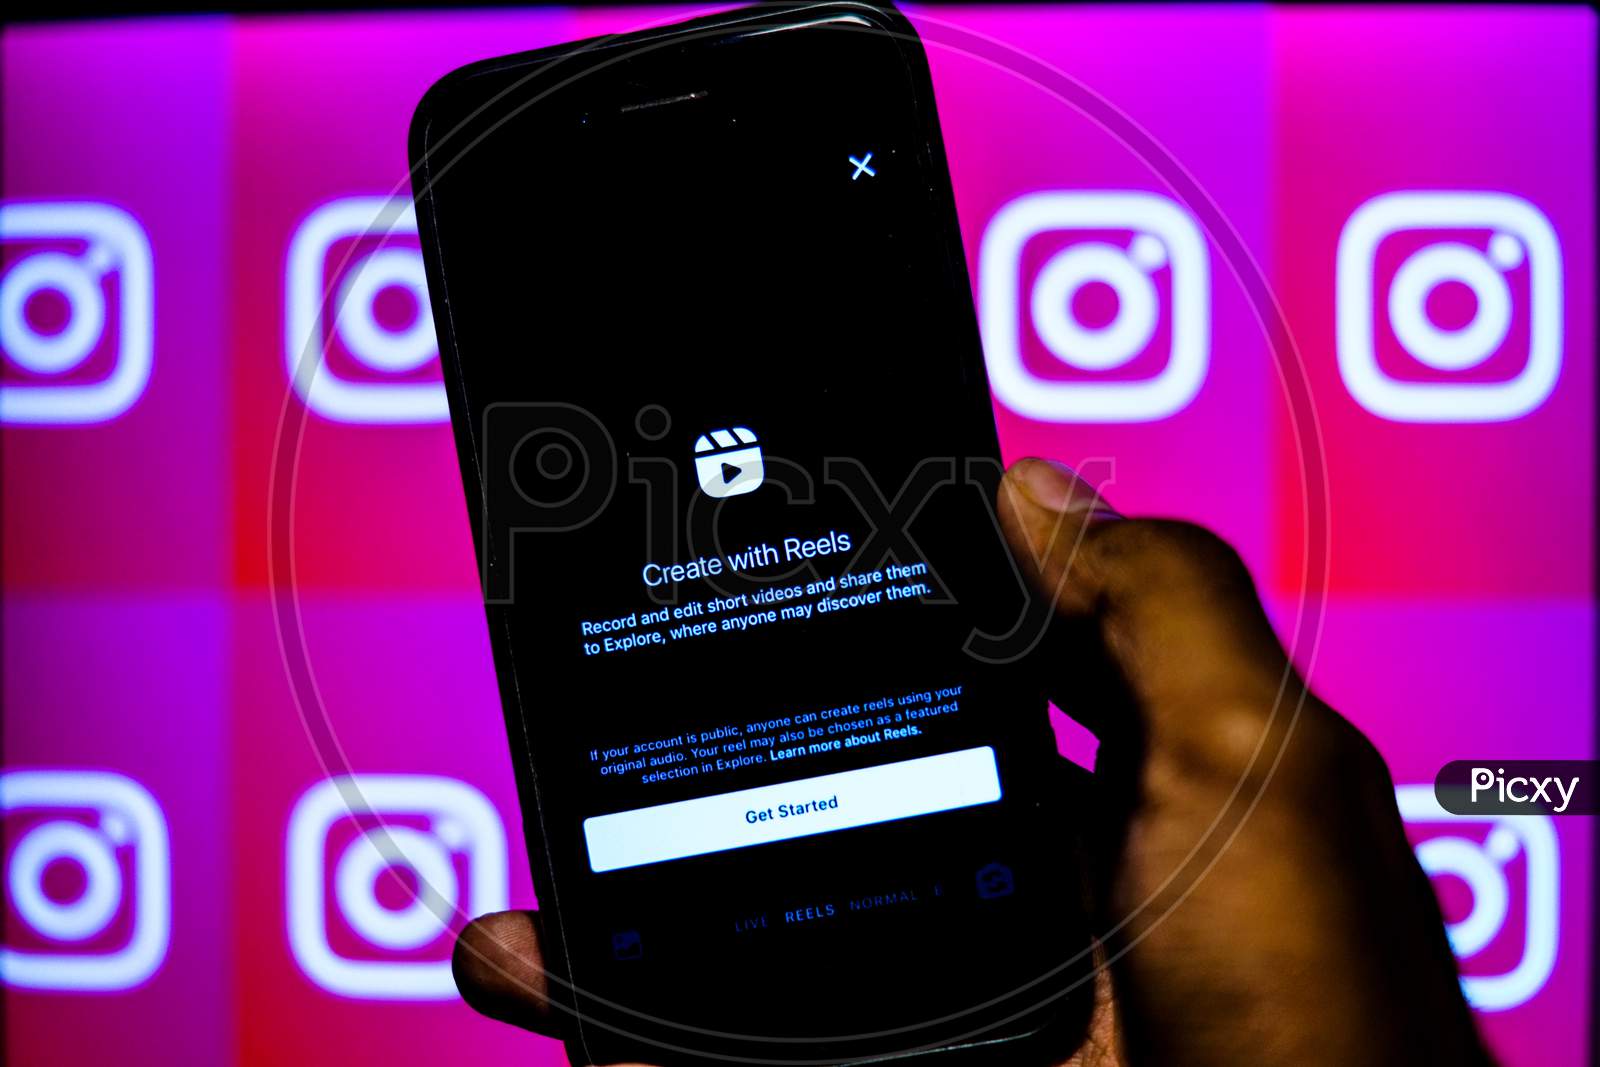 Instagram new update Instagram Reels on a Mobile Screen with a finger about to touch and Instagram logo in the background